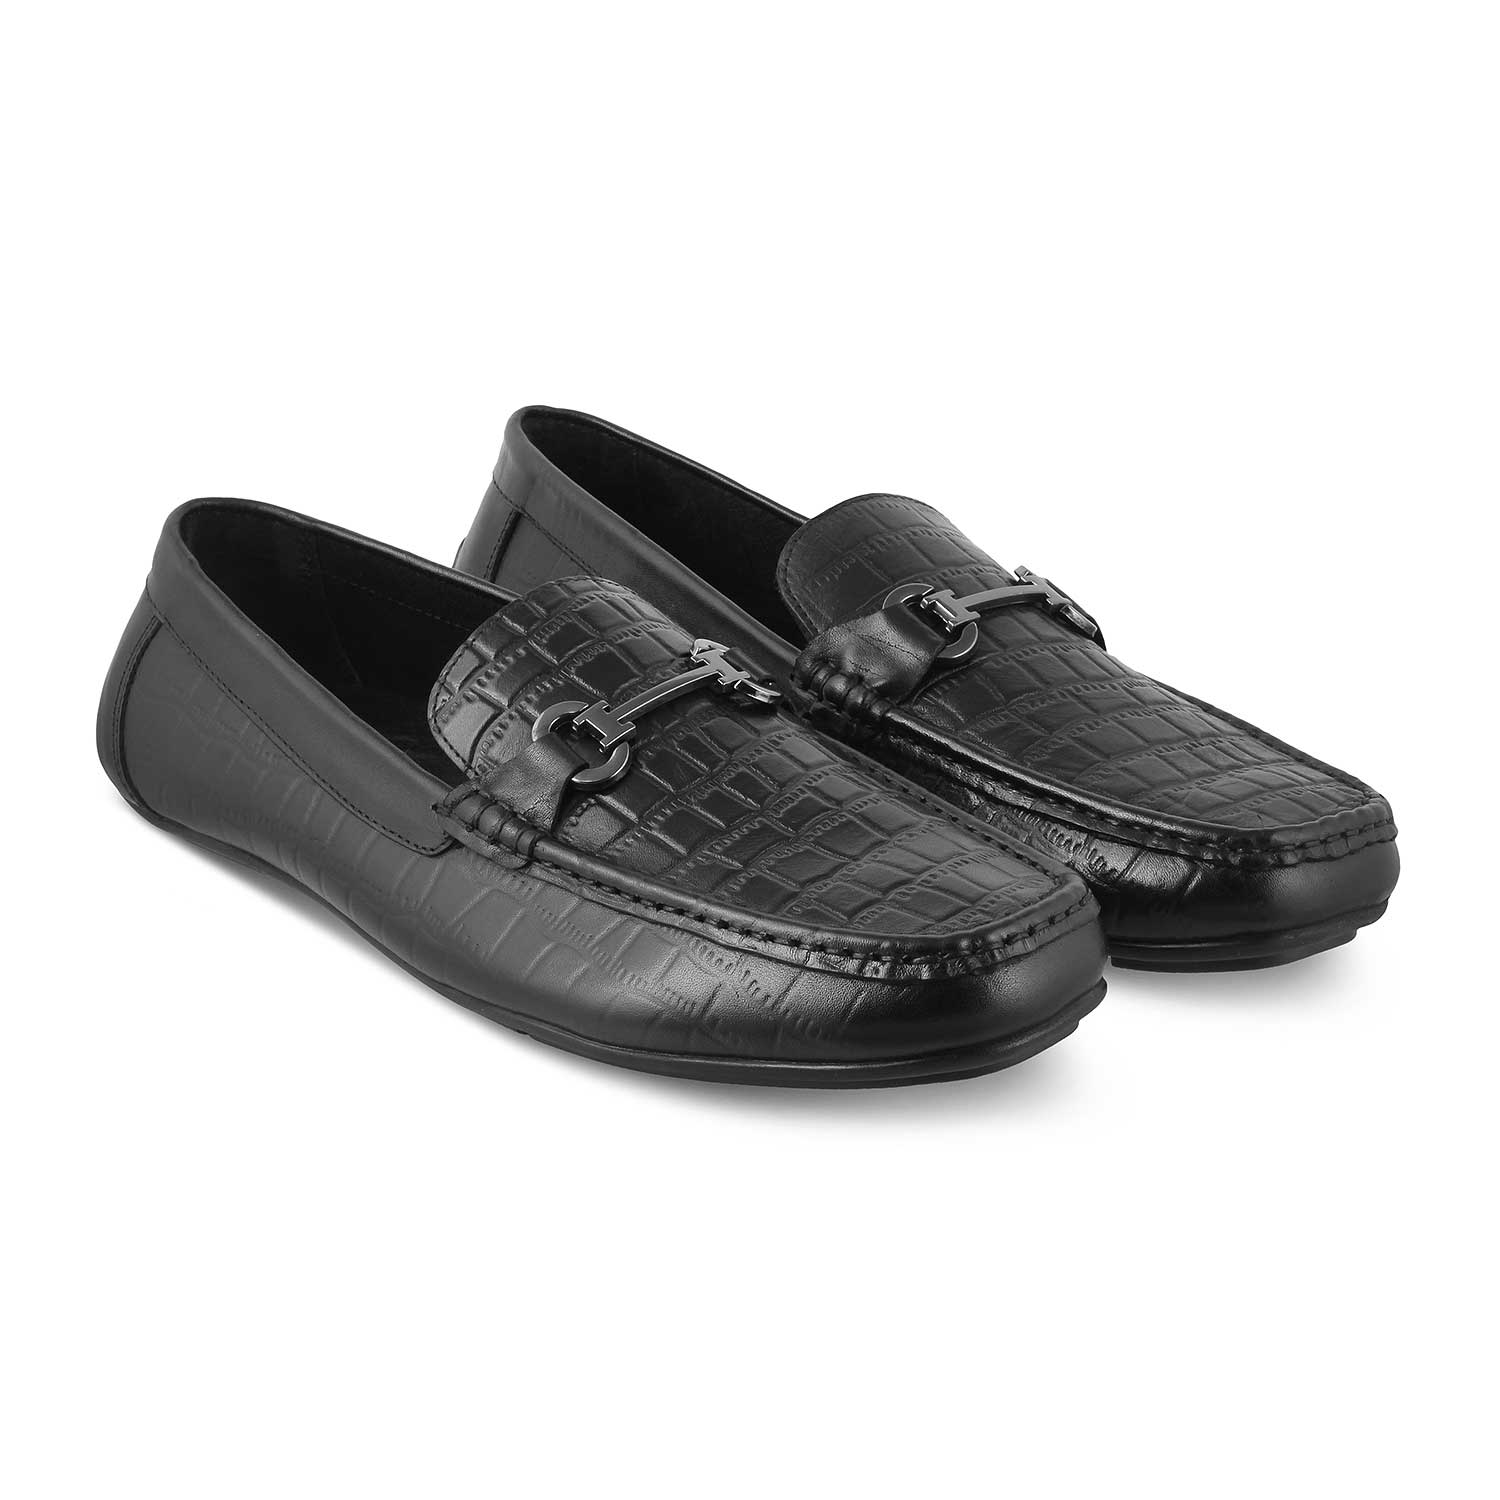 Tresmode-The Yoxile Black Men's Leather Driving Loafers Tresmode-Tresmode